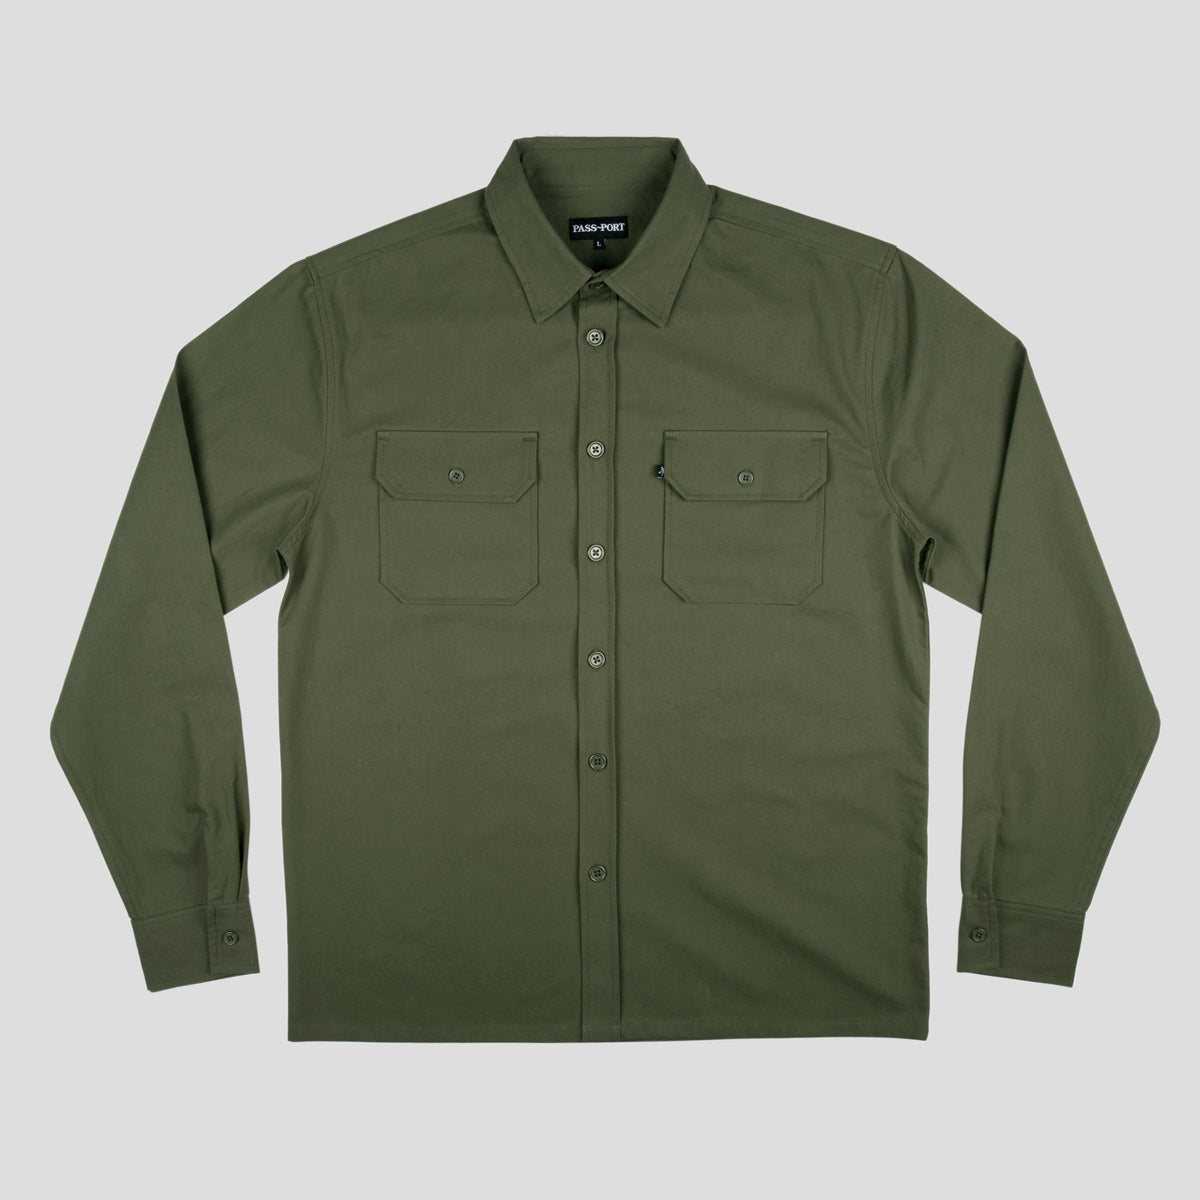 PASS~PORT "WORKERS" L/S SHIRT OLIVE